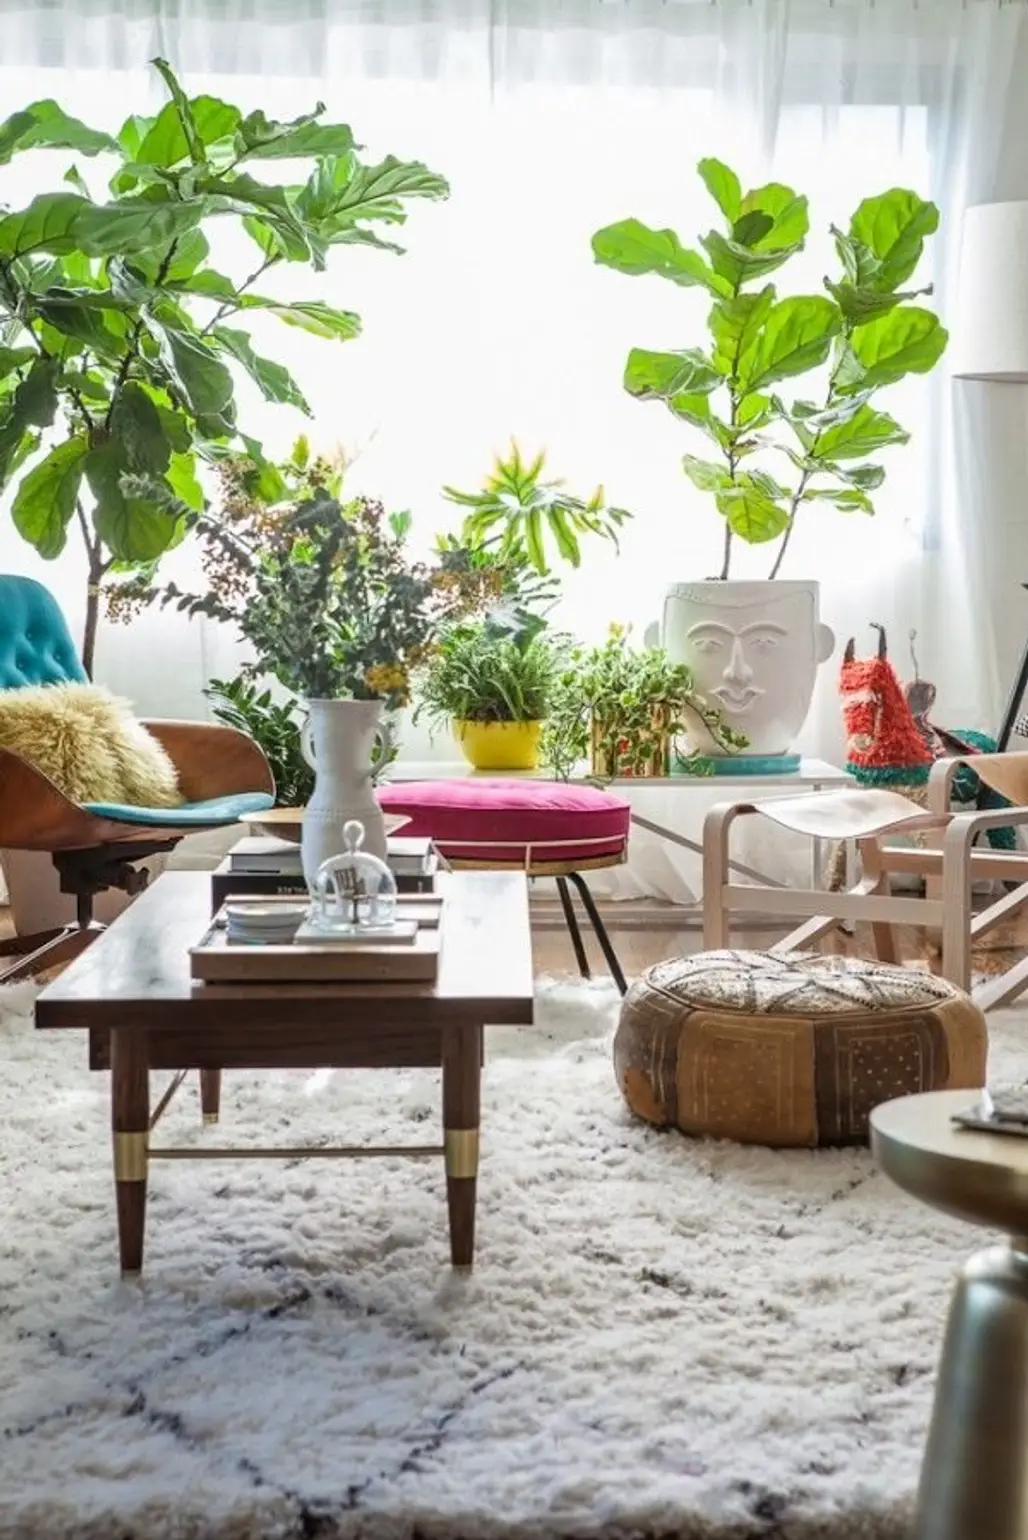 Styling an Indoor Garden by Emily Henderson